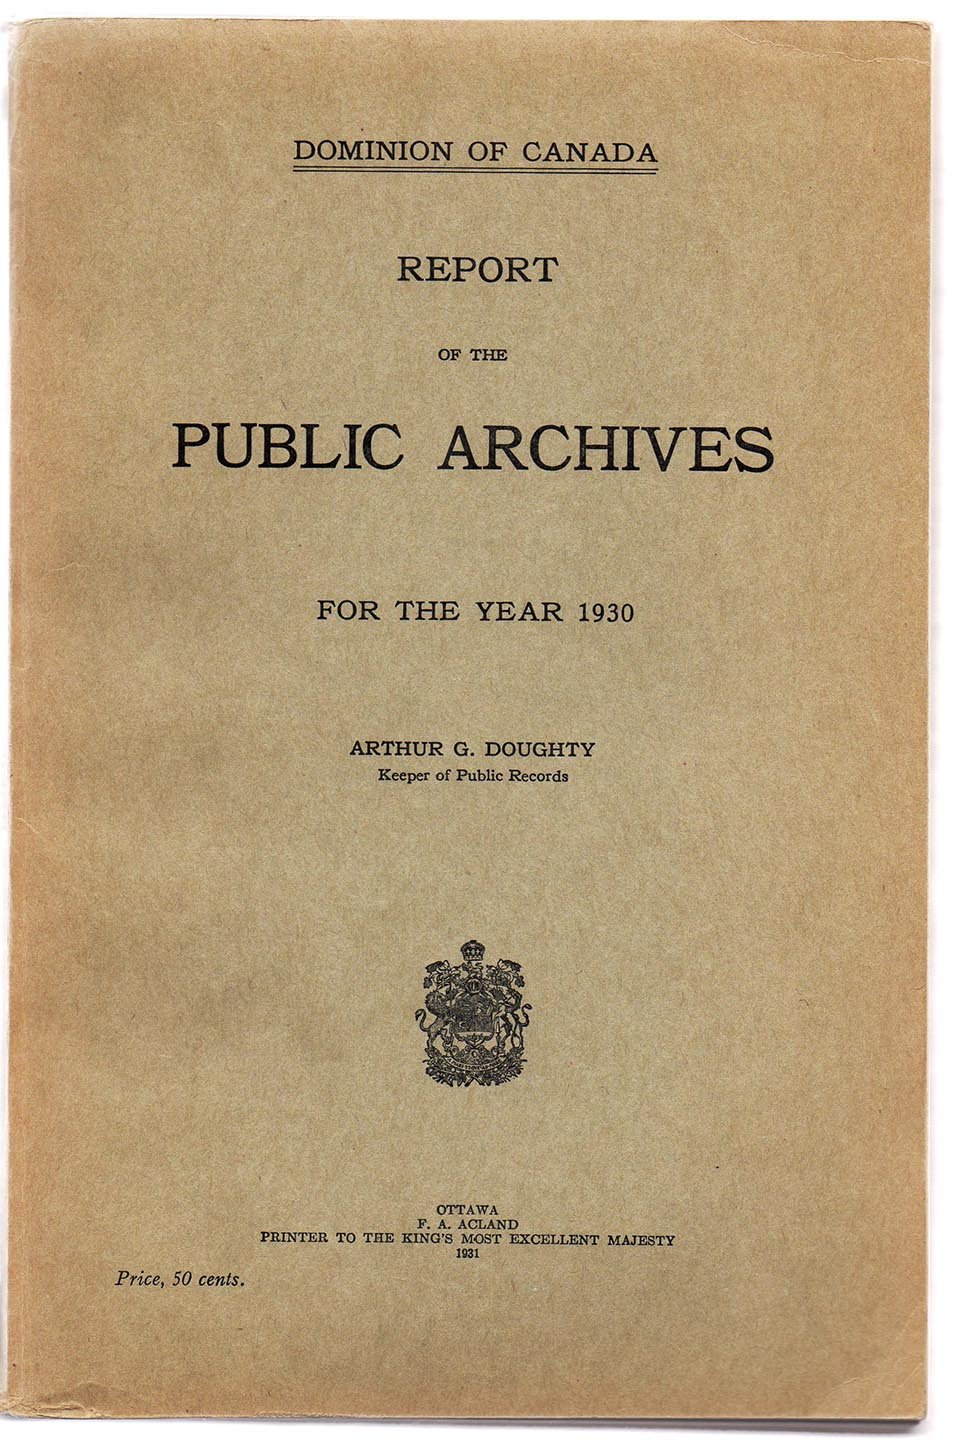 Report of the Public Archives For the Year 1930